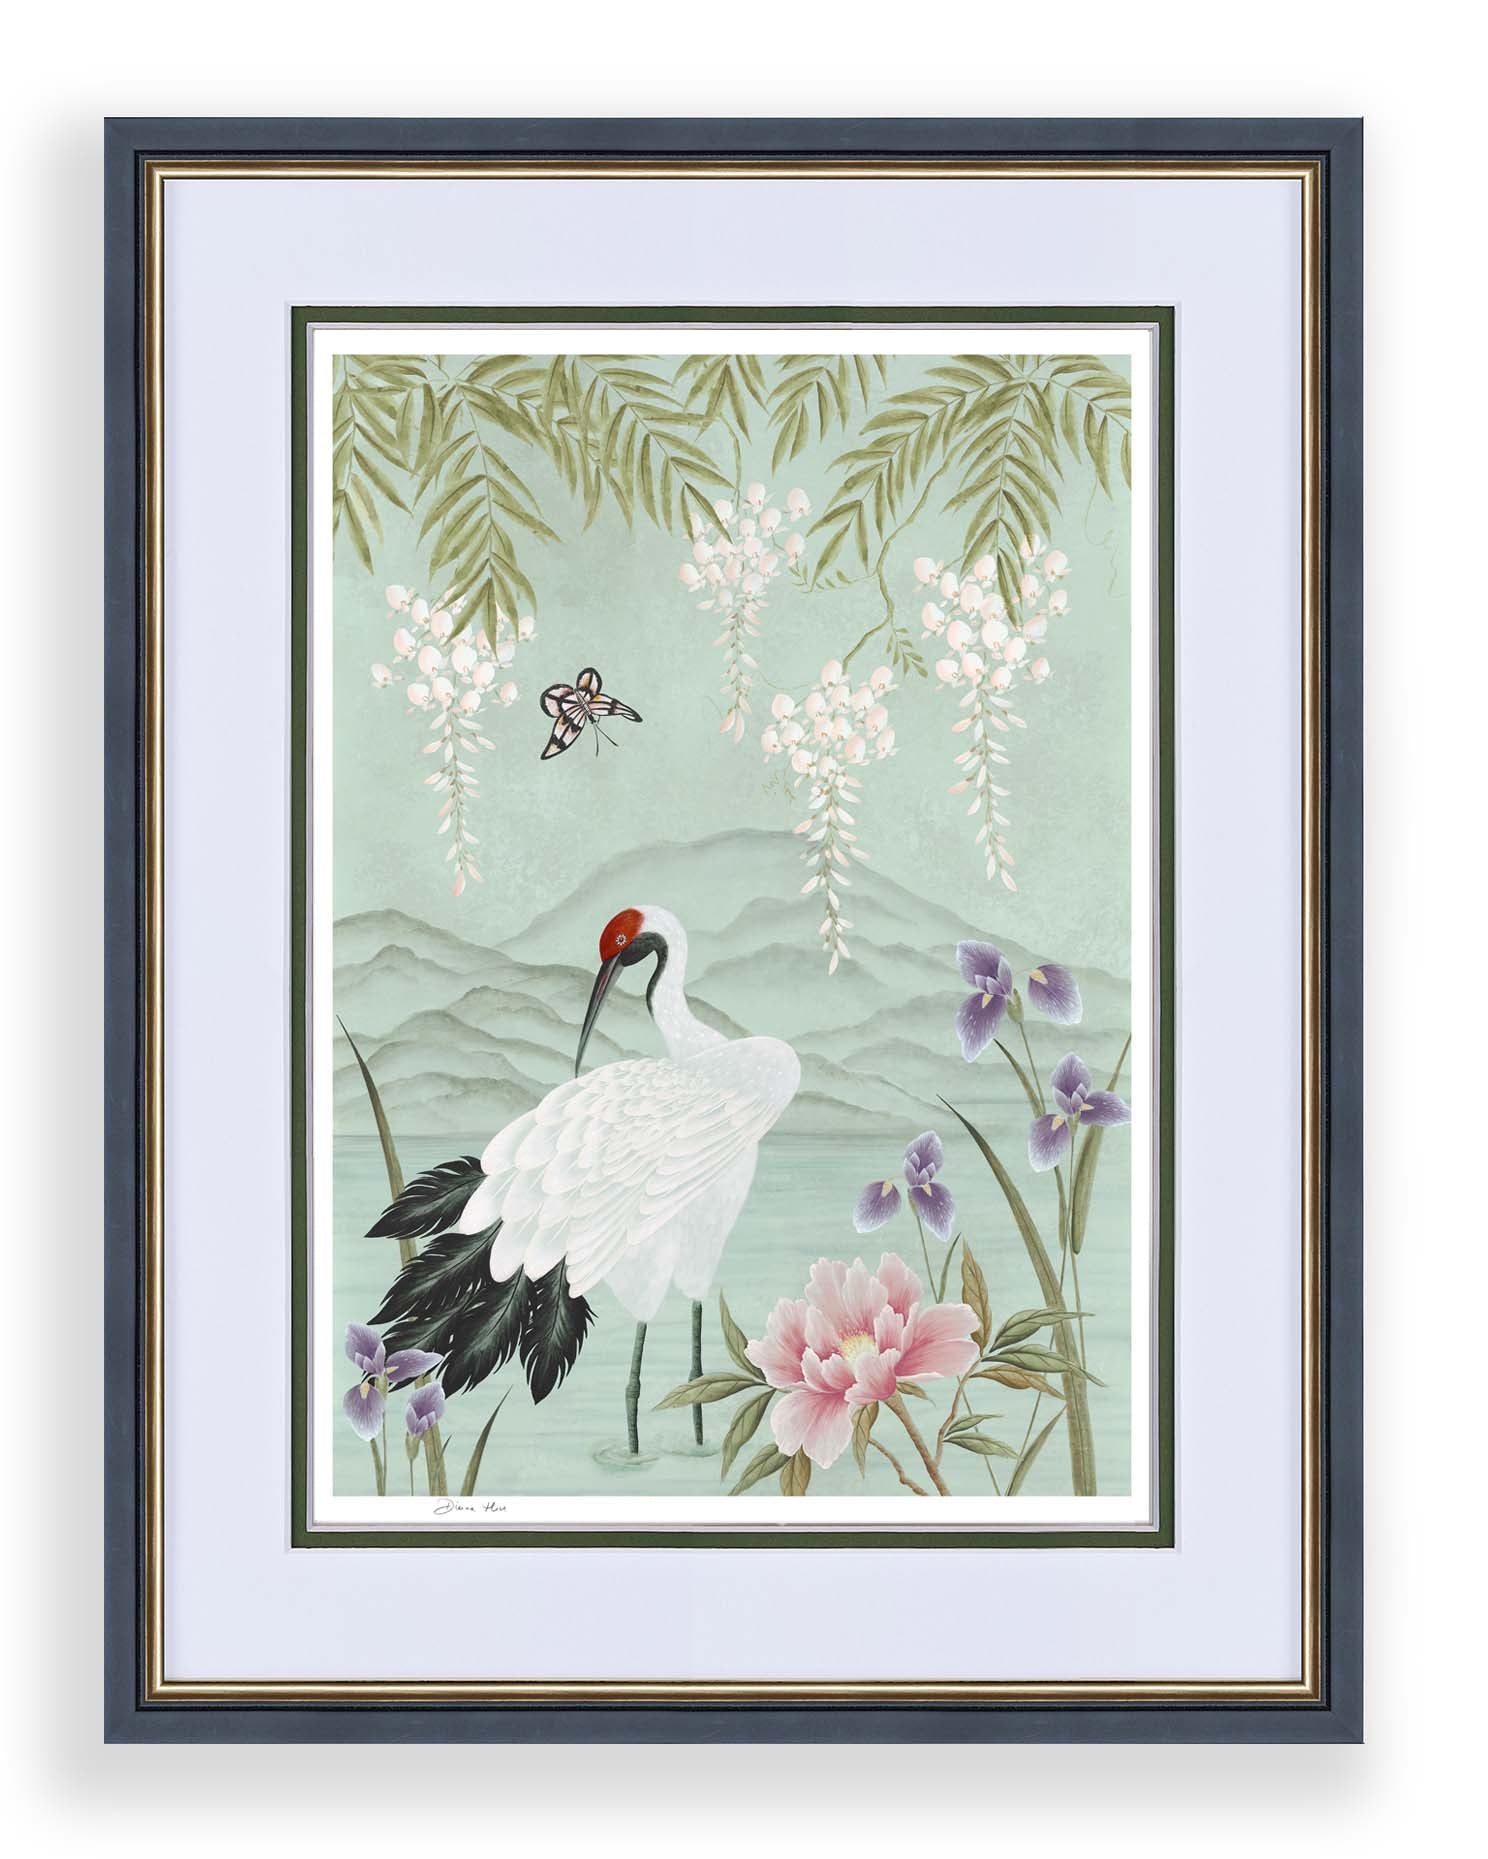 Elina chinoiserie art print by Diane Hill in a black frame